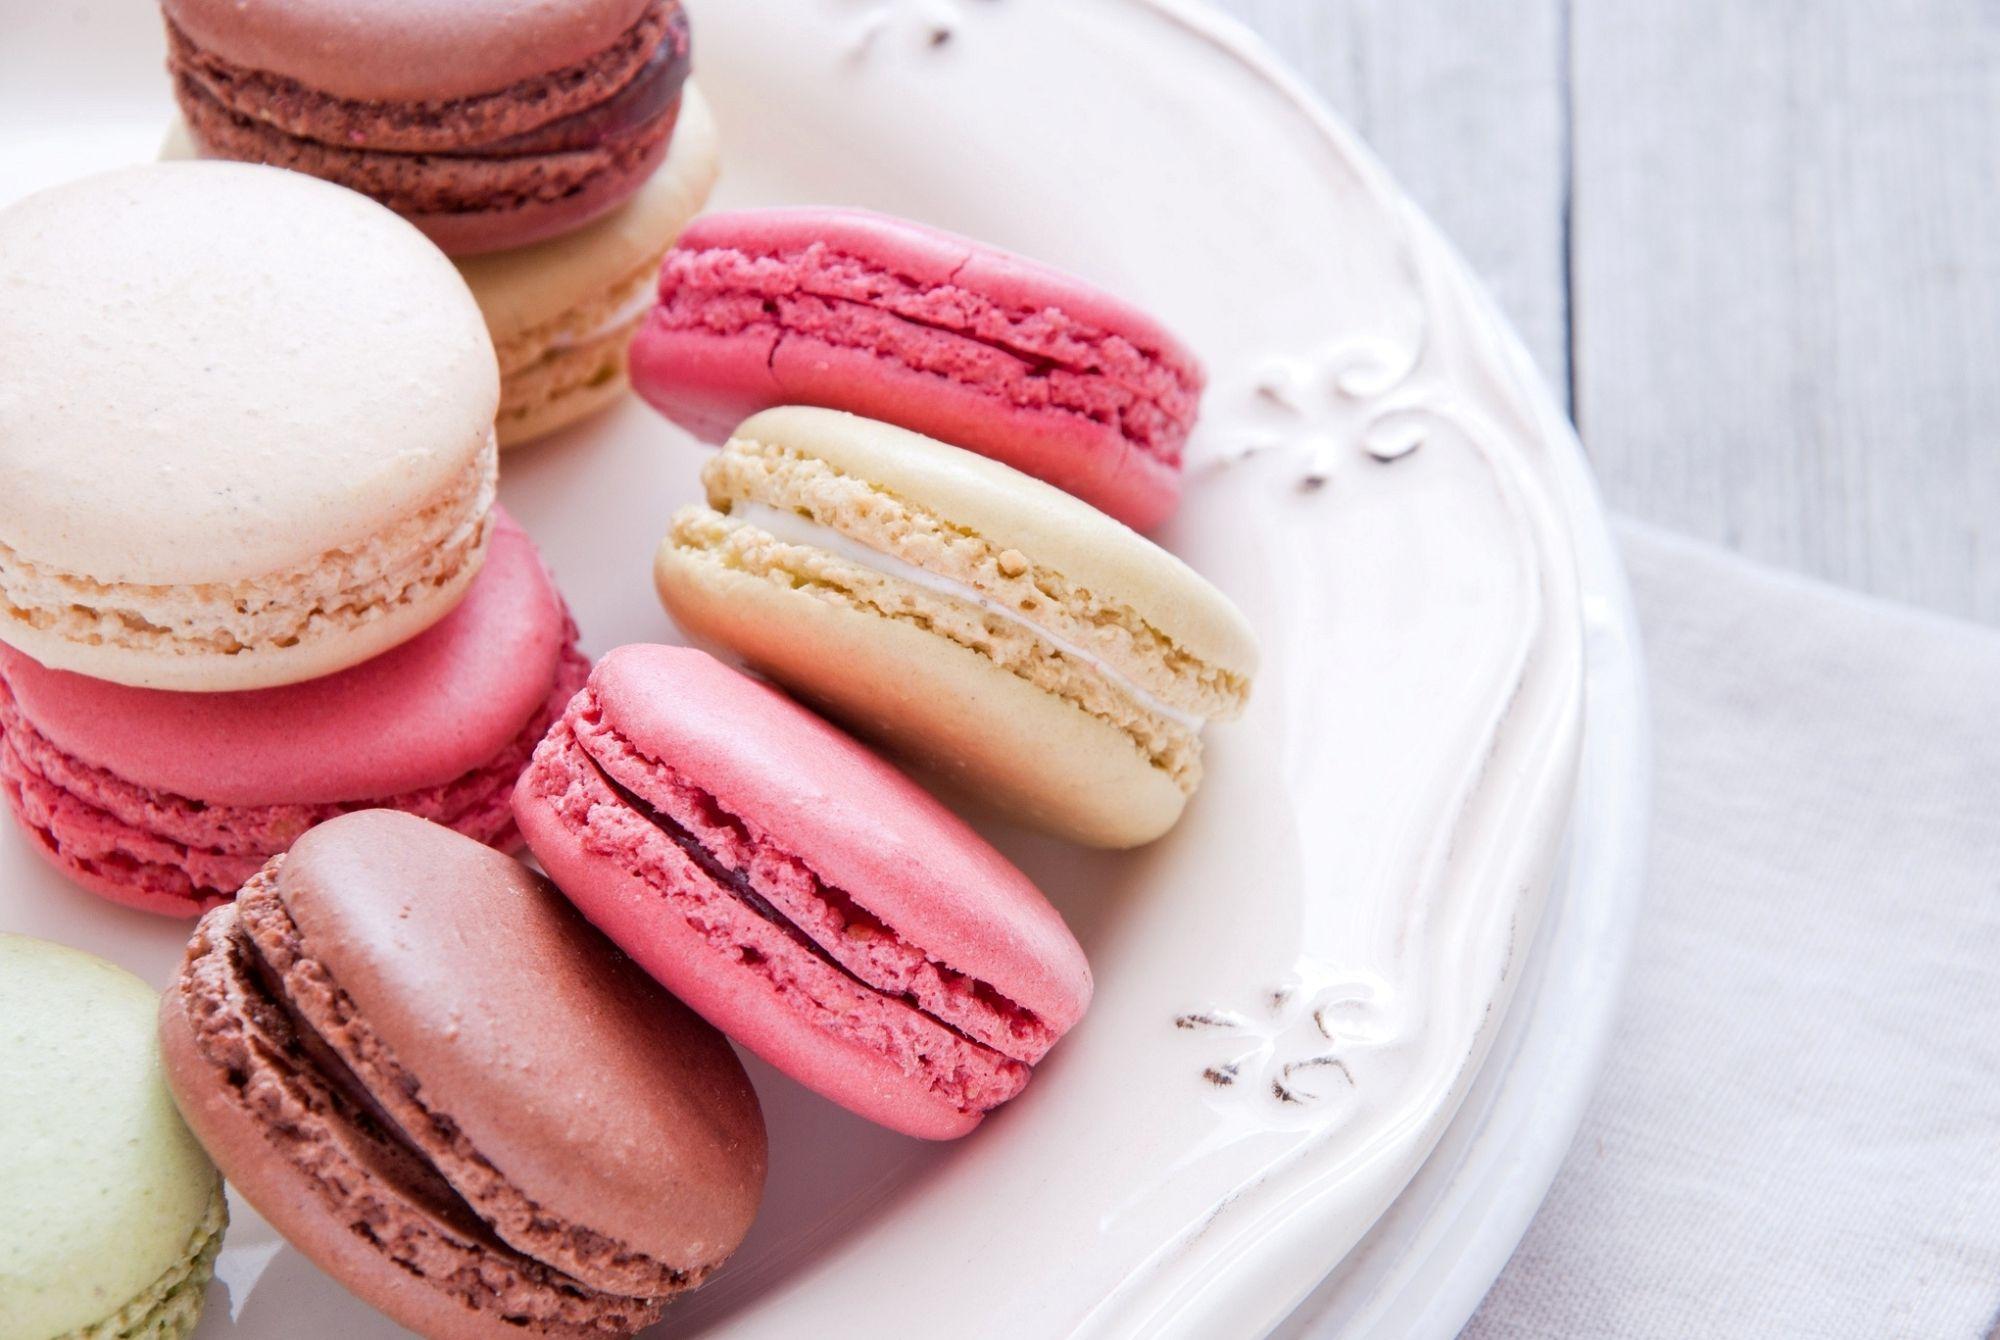 A plate of colorful macarons on a white plate. - Macarons